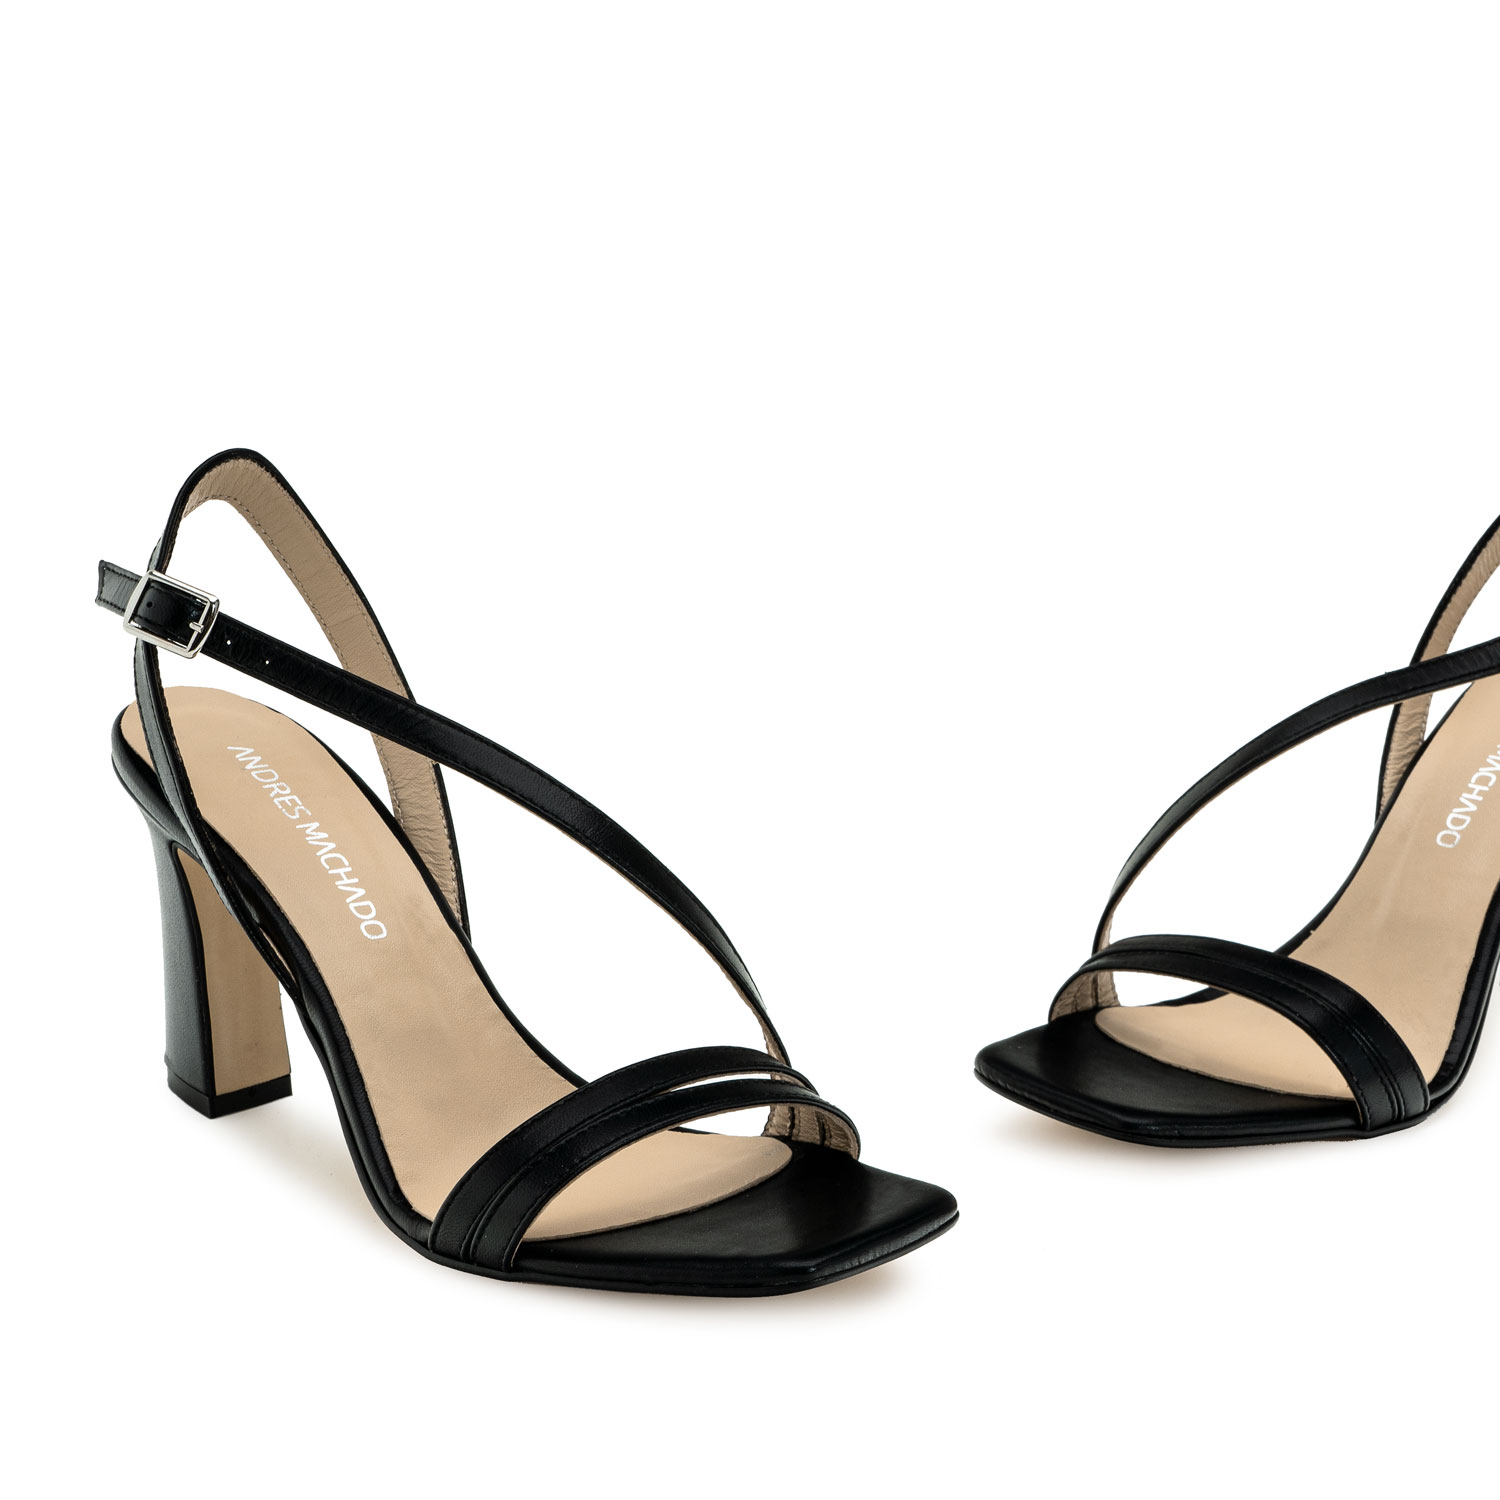 Crossover Heeled Sandals in Black Leather 